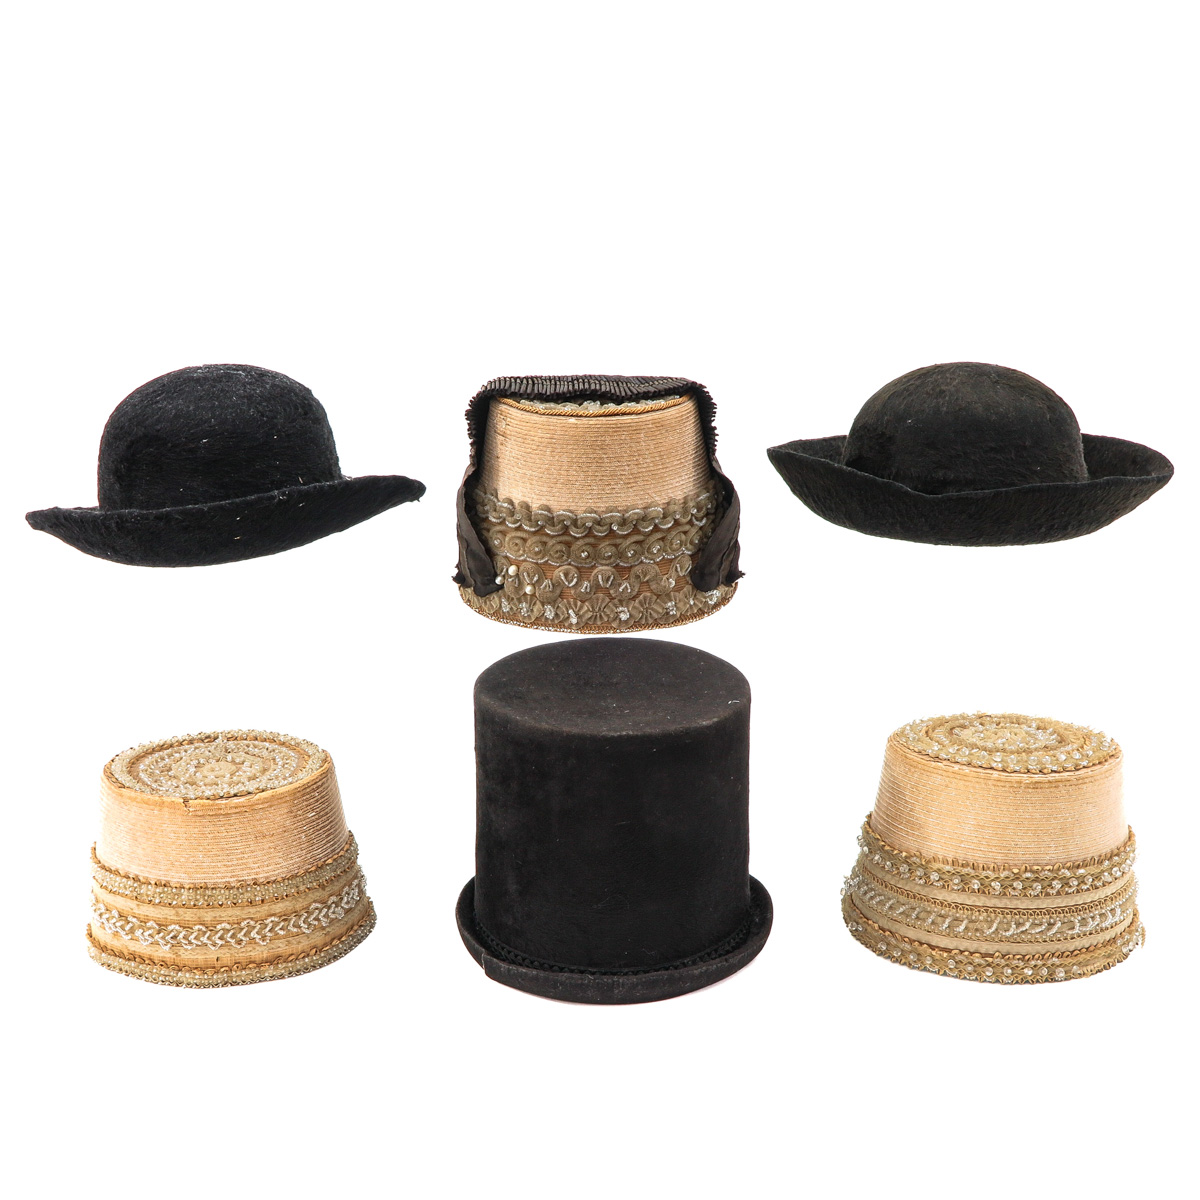 A Lot of 6 Hats and 1 Purse - Image 3 of 10